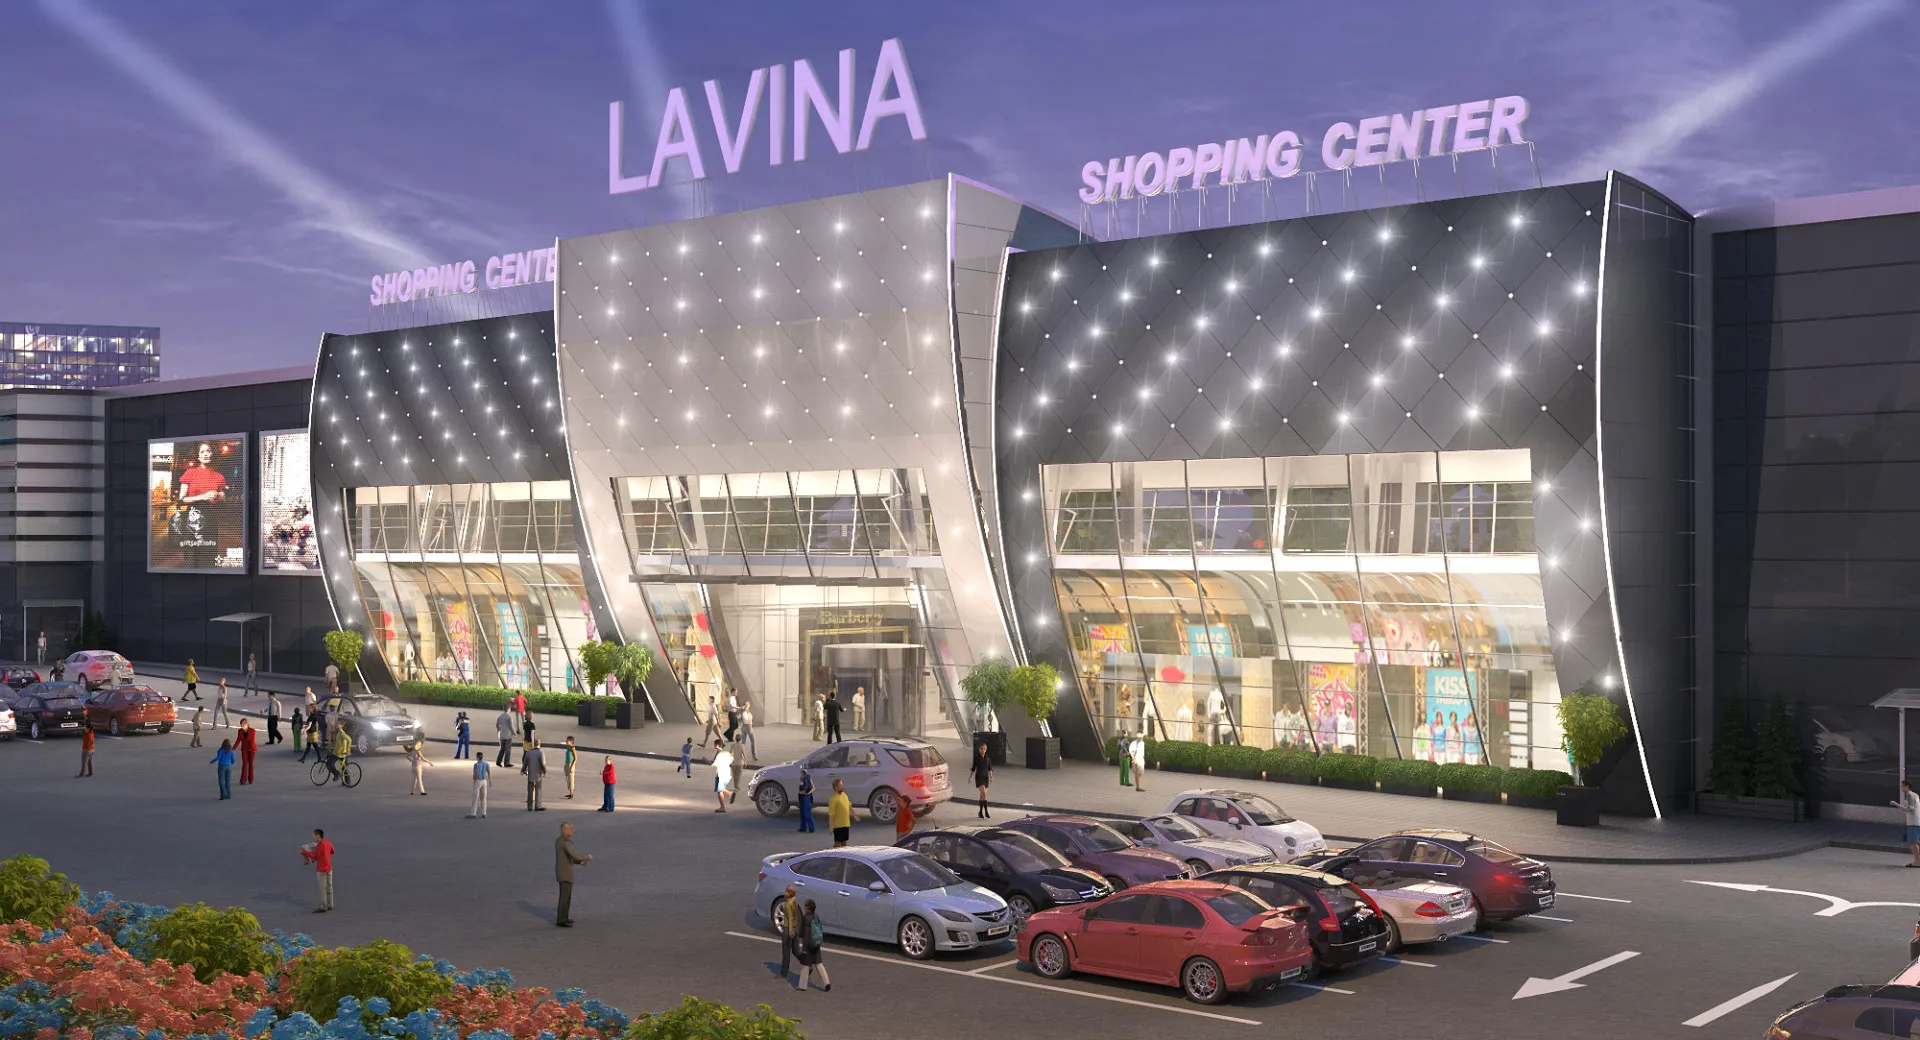 Shopping Center Lavina in Ukraine, europe | Handbags,Shoes,Accessories,Clothes,Home Decor,Sportswear - Country Helper